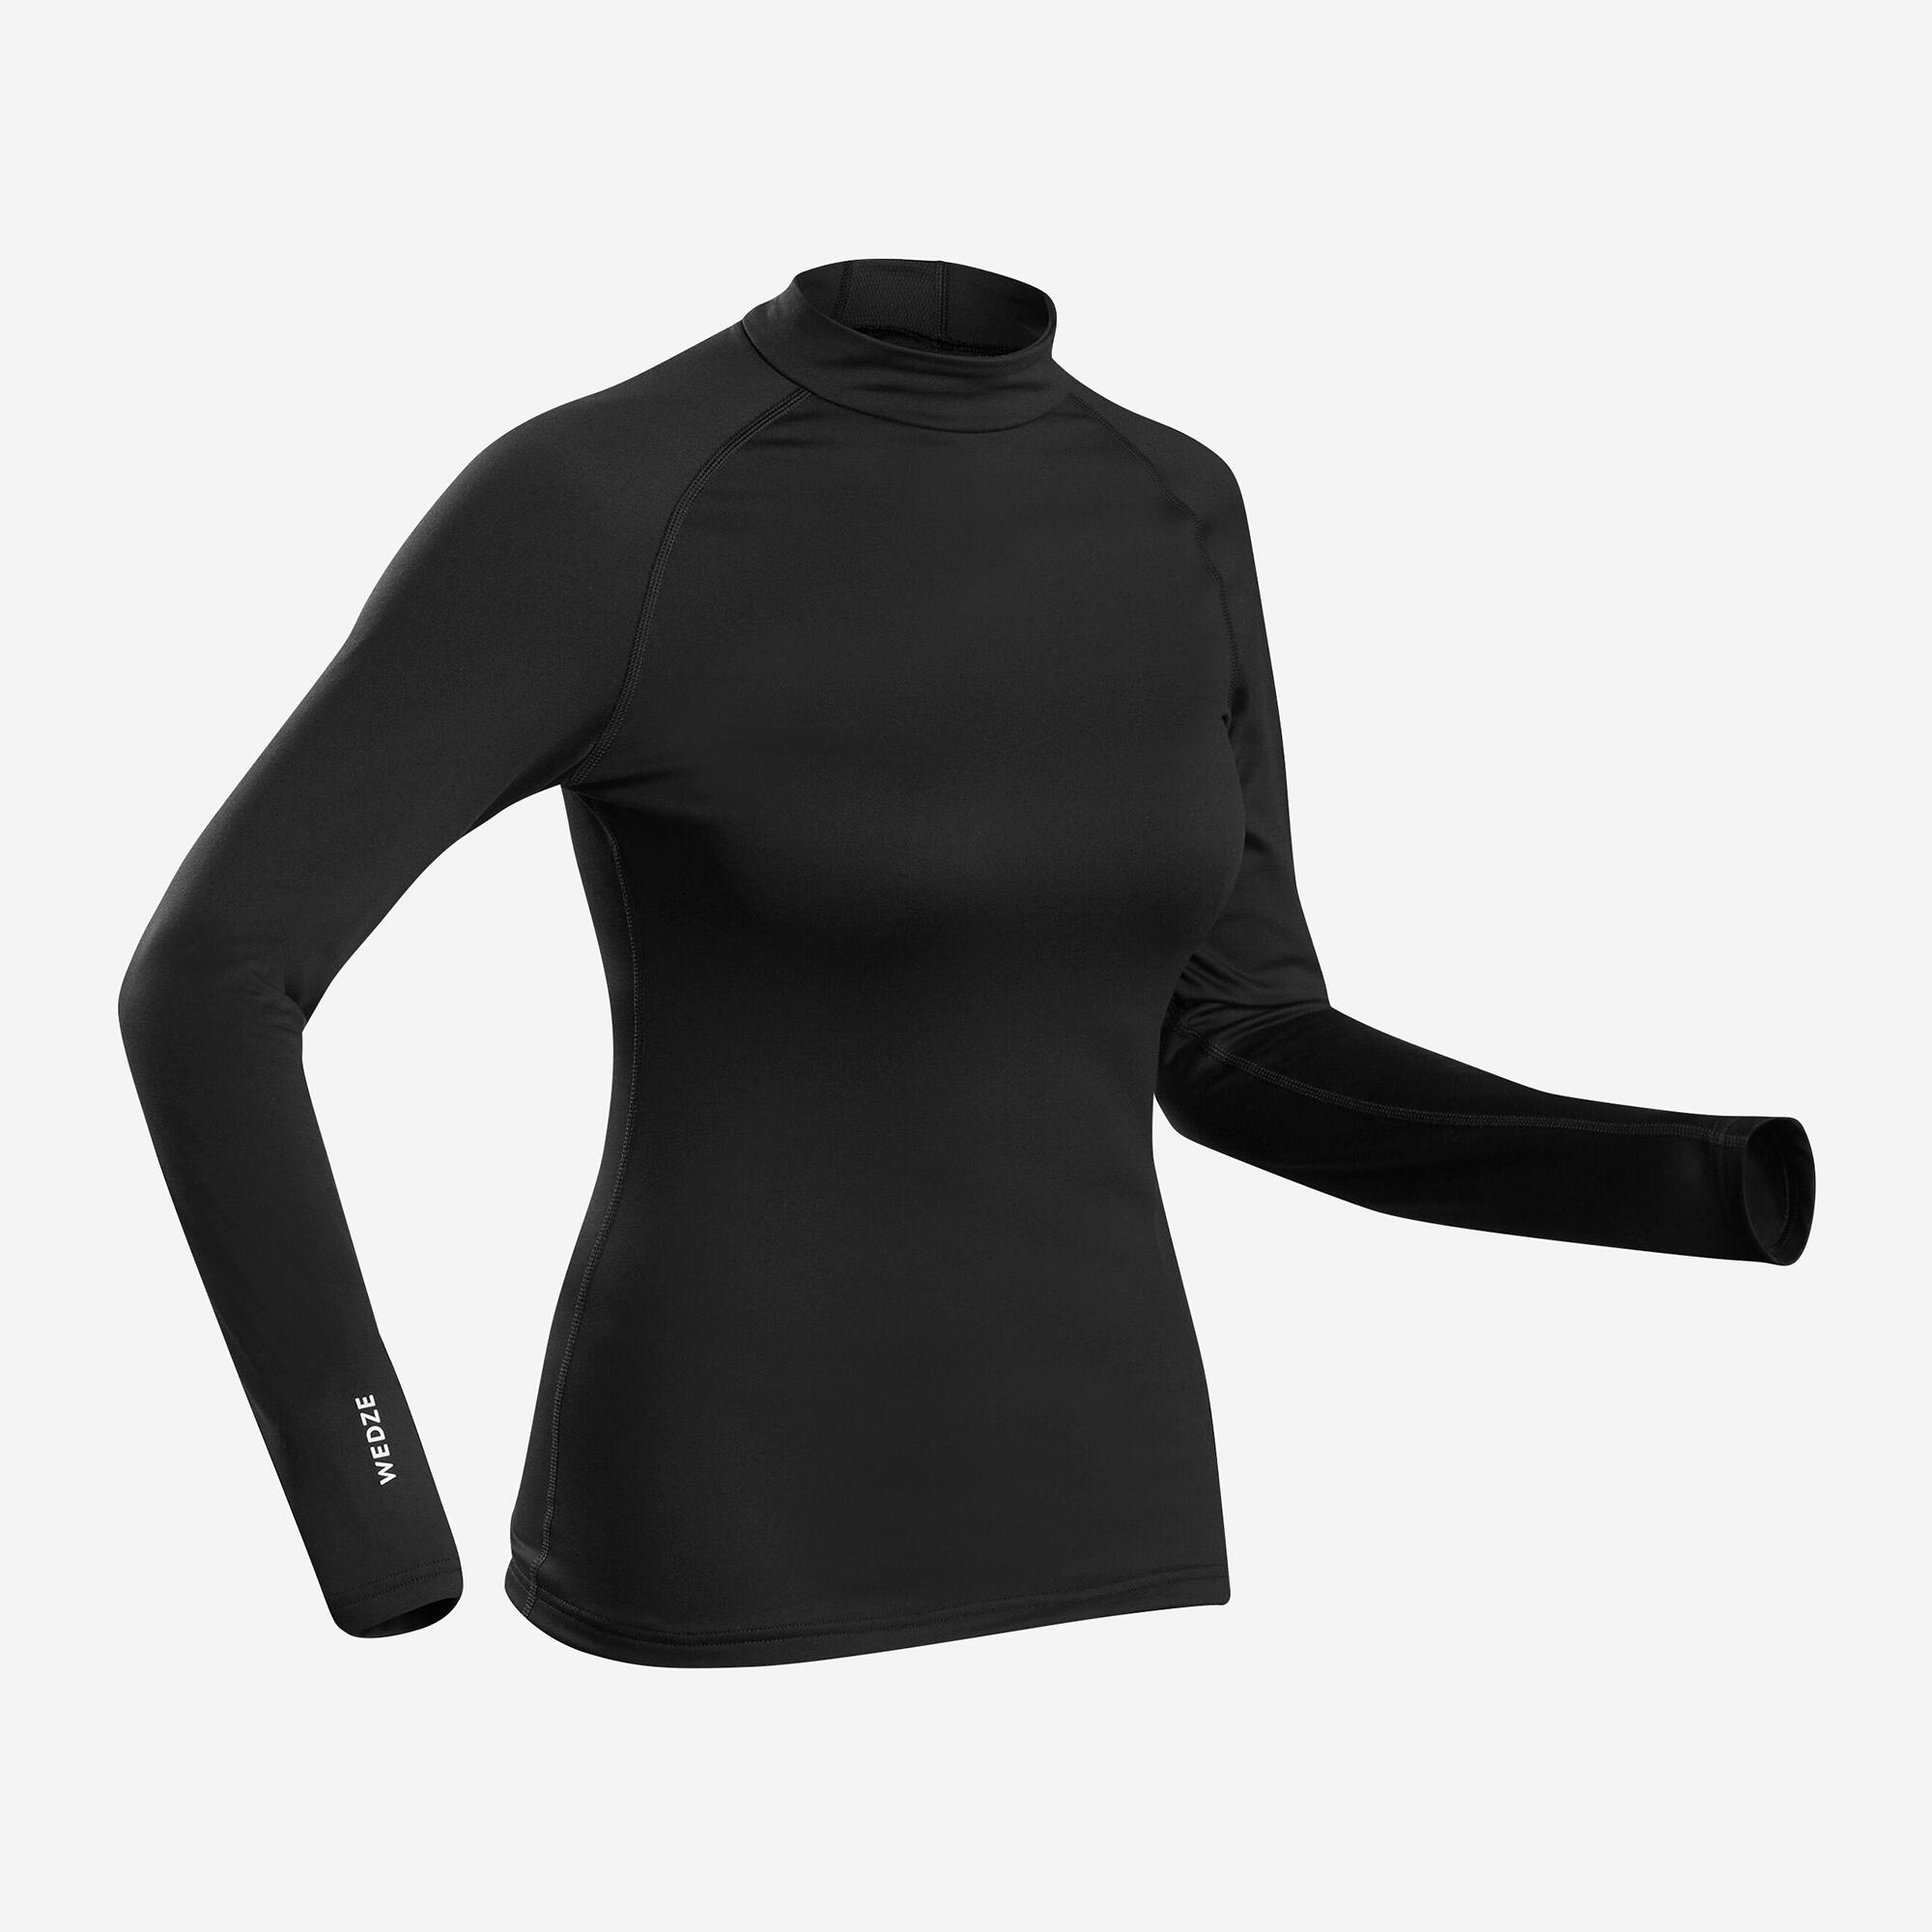 UNDER ARMOUR Black Fitted Baselayer ColdGear Mock Neck White Seams Top  Womens M